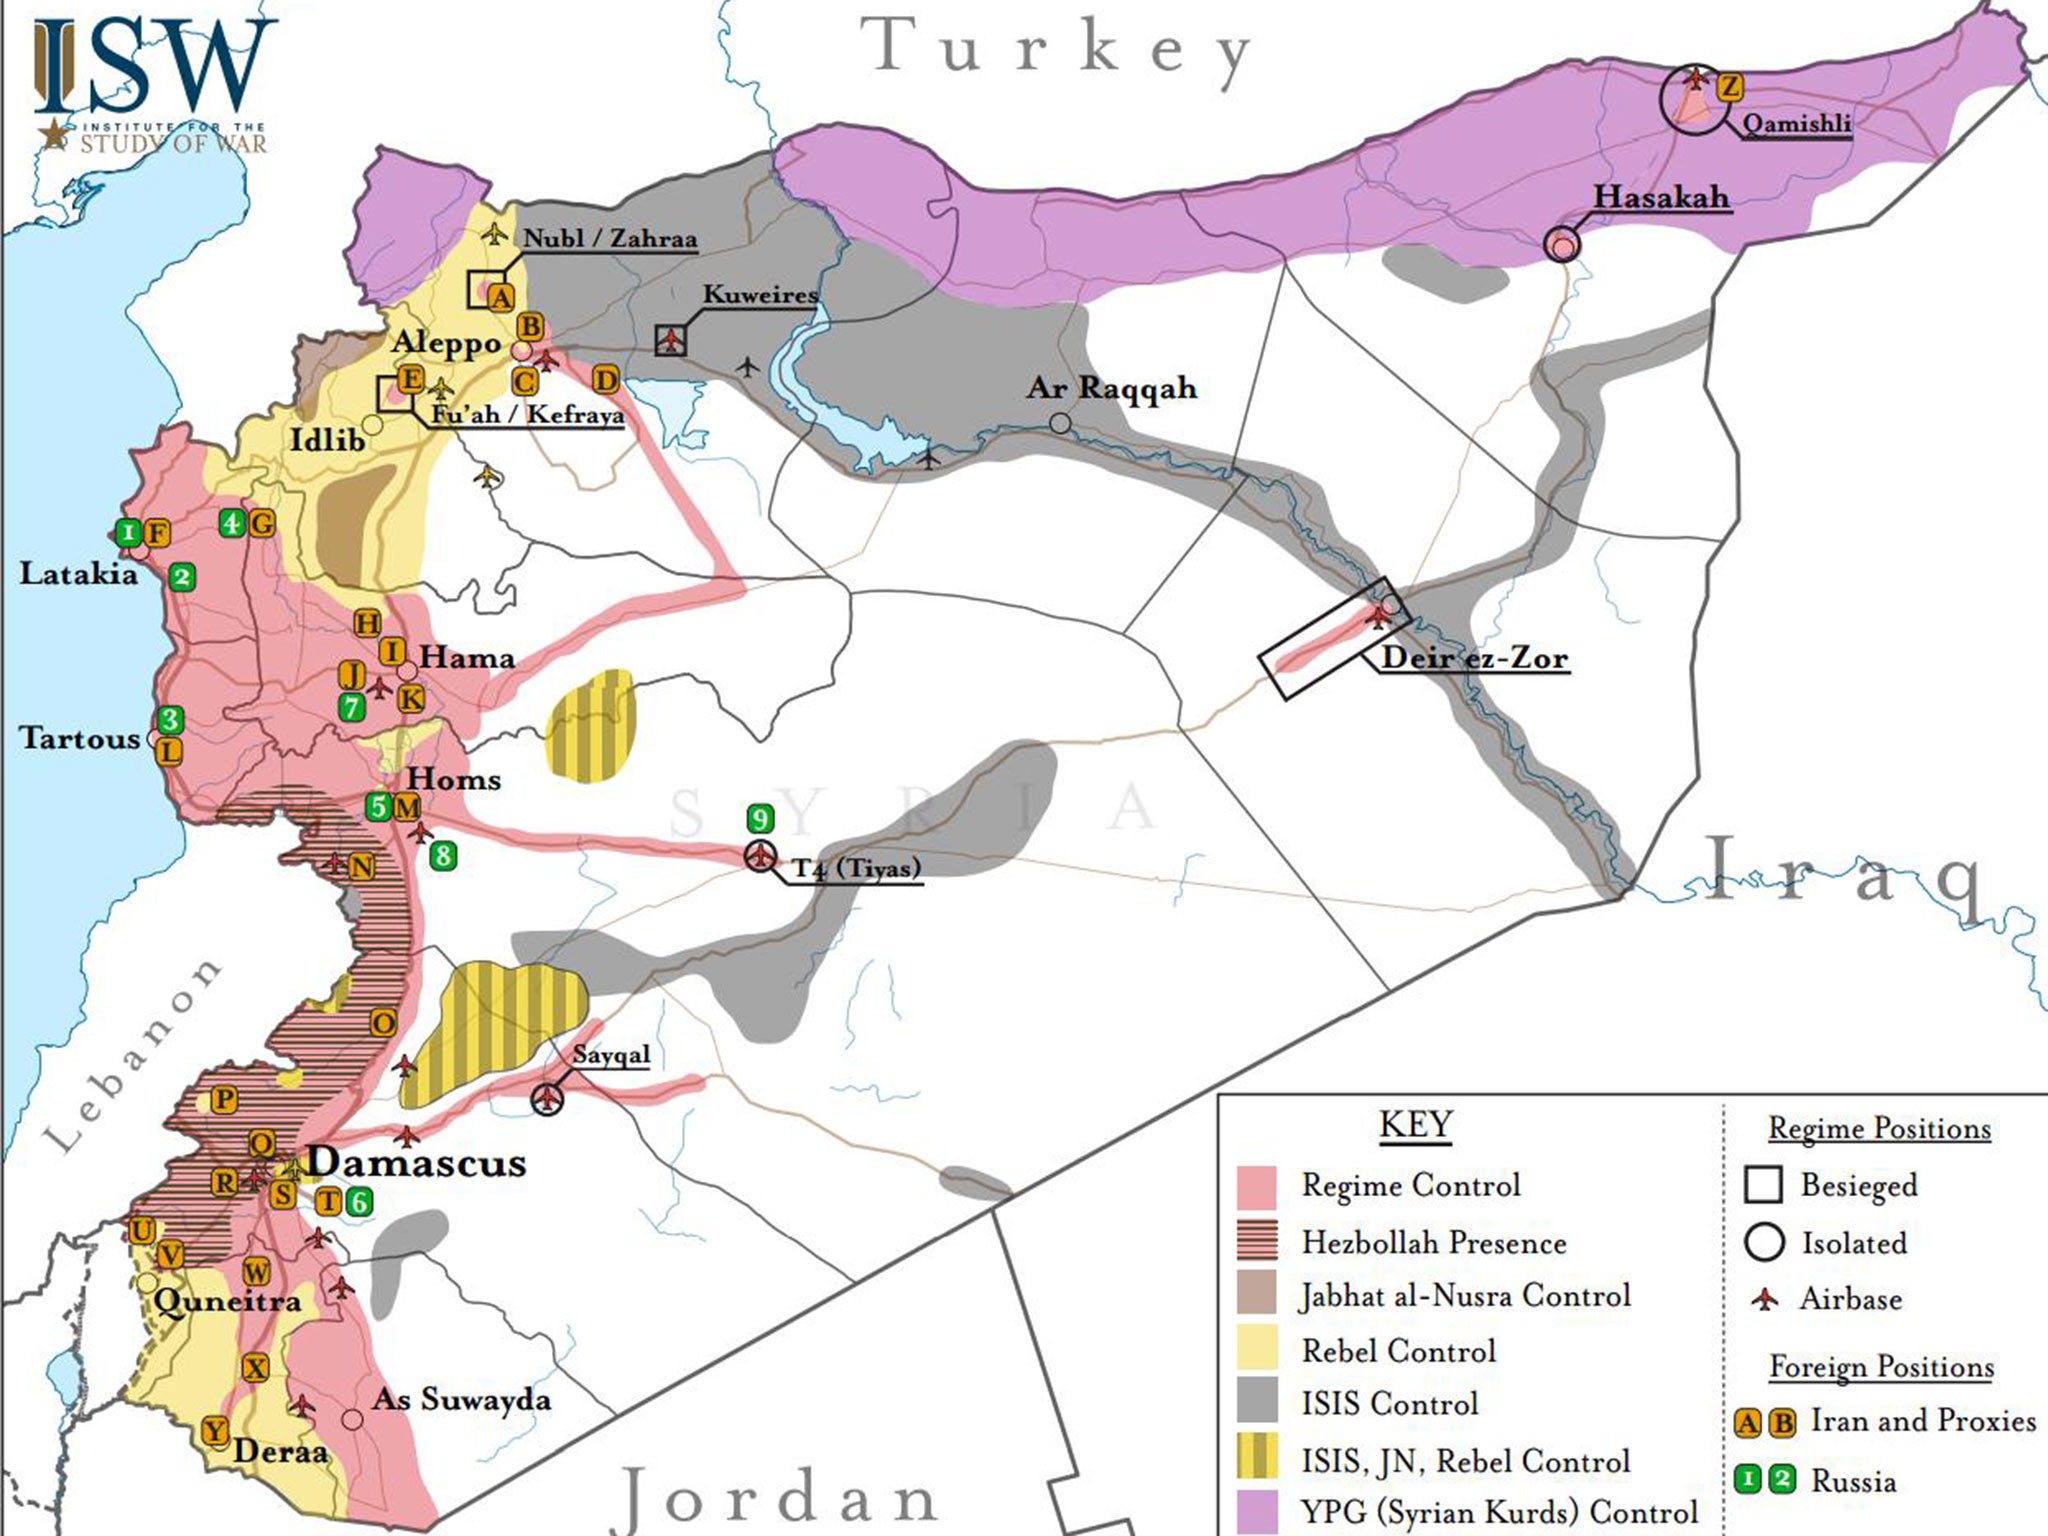 The Institute for the Study of War's map showing the parts of Syria controlled by various parties in the conflict as of November 2015.